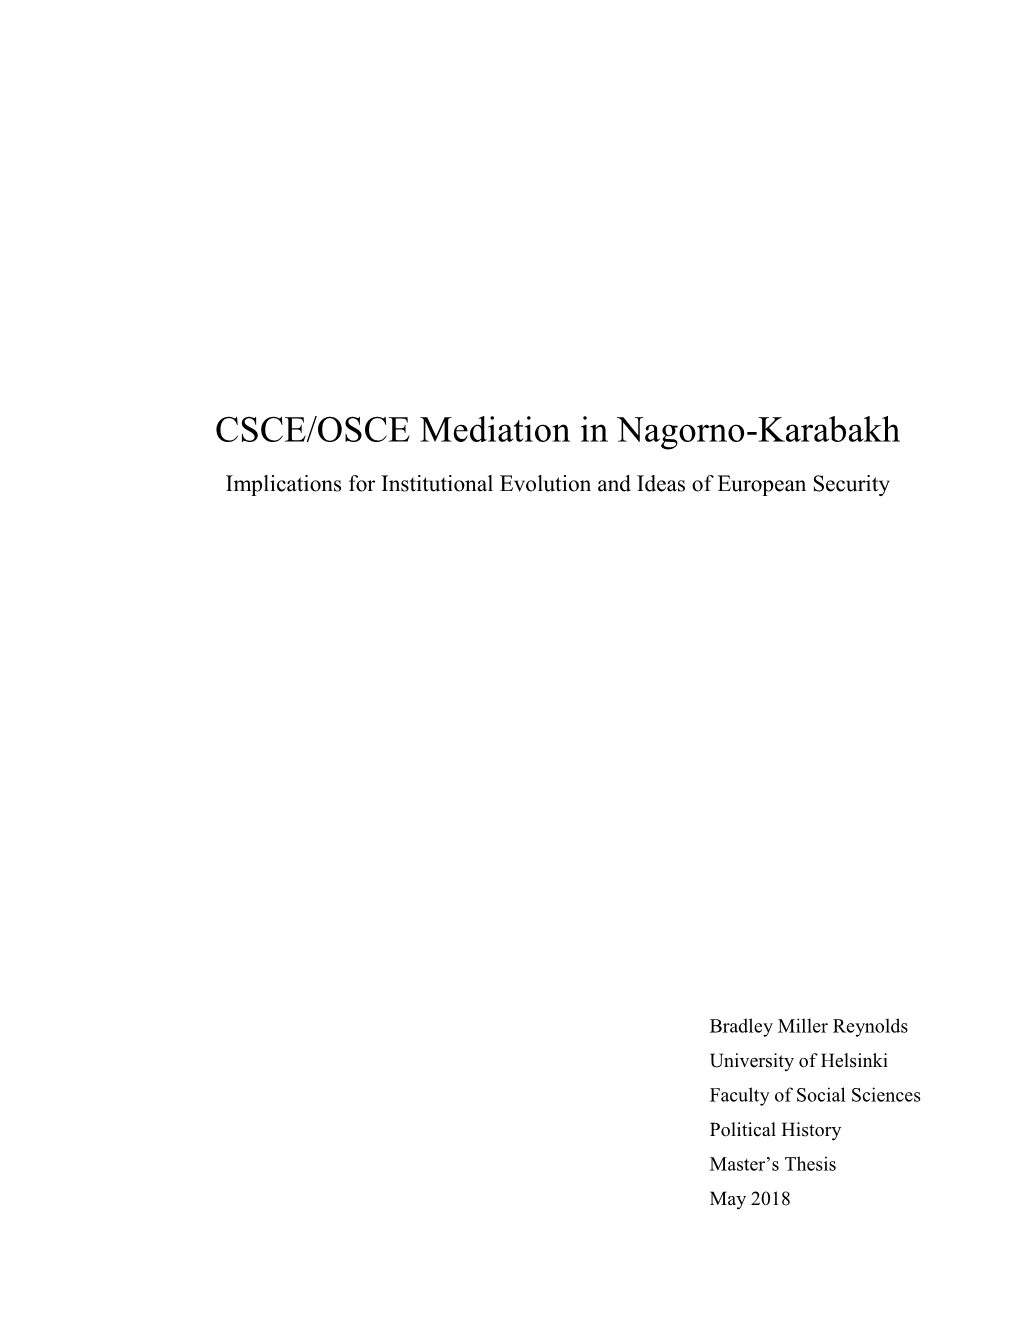 CSCE/OSCE Mediation in Nagorno-Karabakh Implications for Institutional Evolution and Ideas of European Security